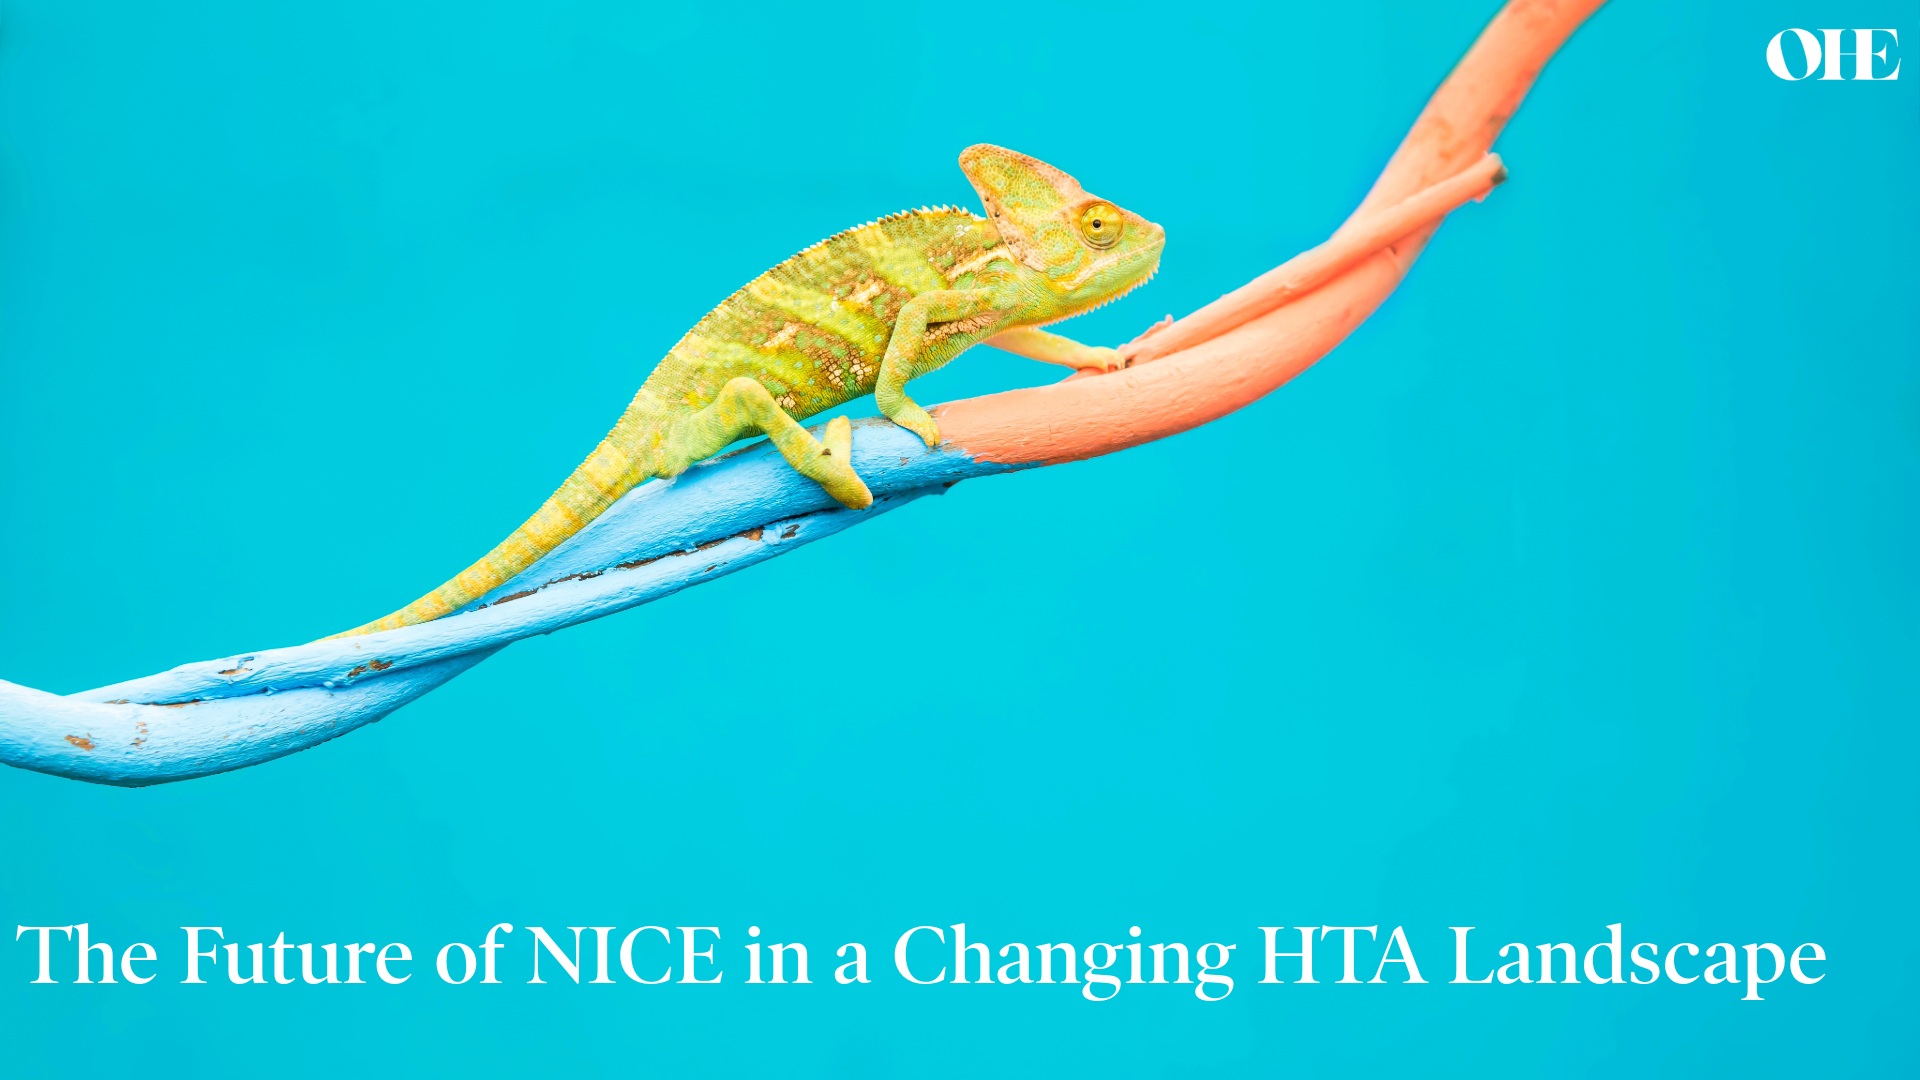 The future of NICE in the changing HTA landscape